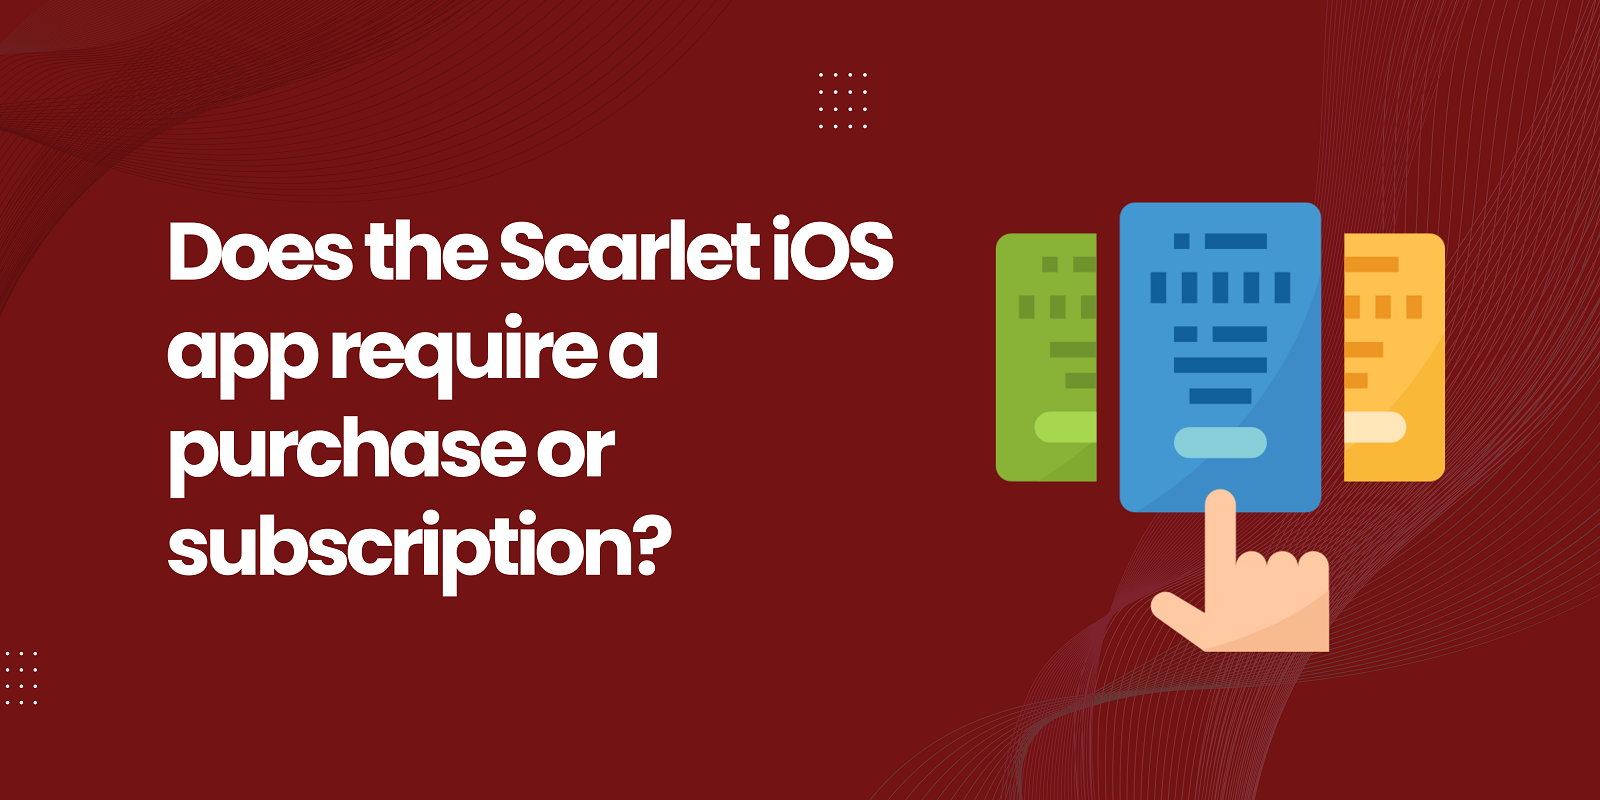 Does the Scarlet iOS app require a purchase or subscription